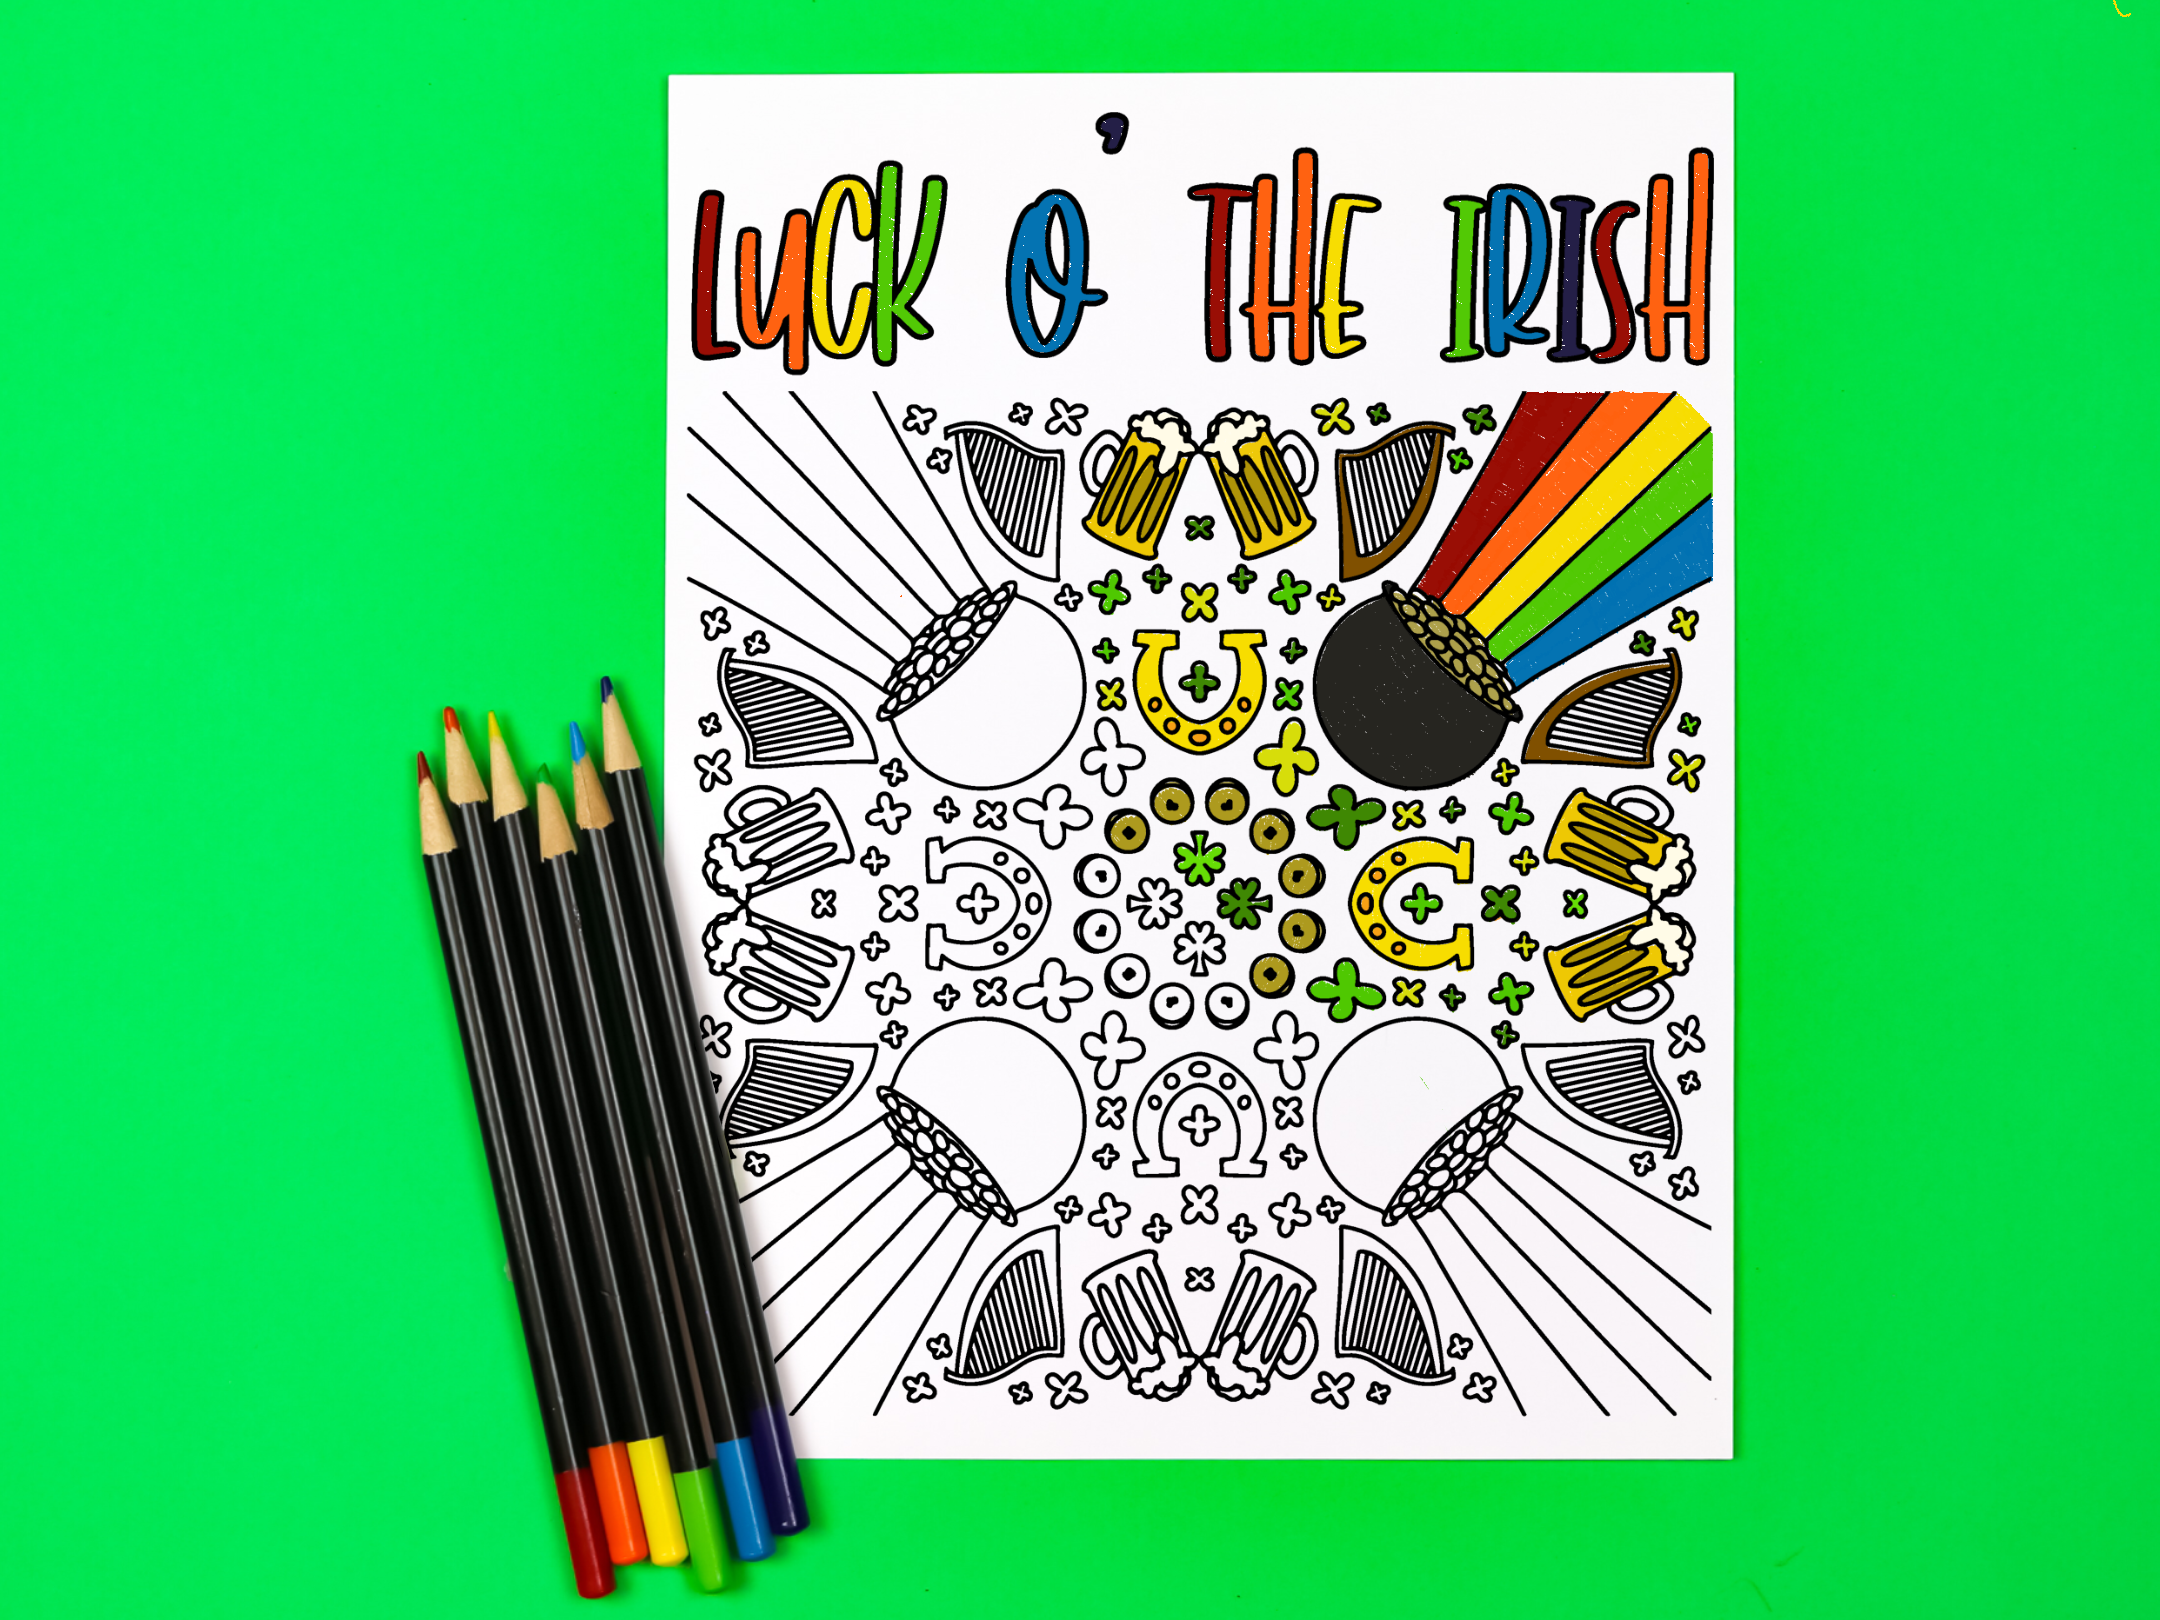 Coloring page for St. Patrick's Day